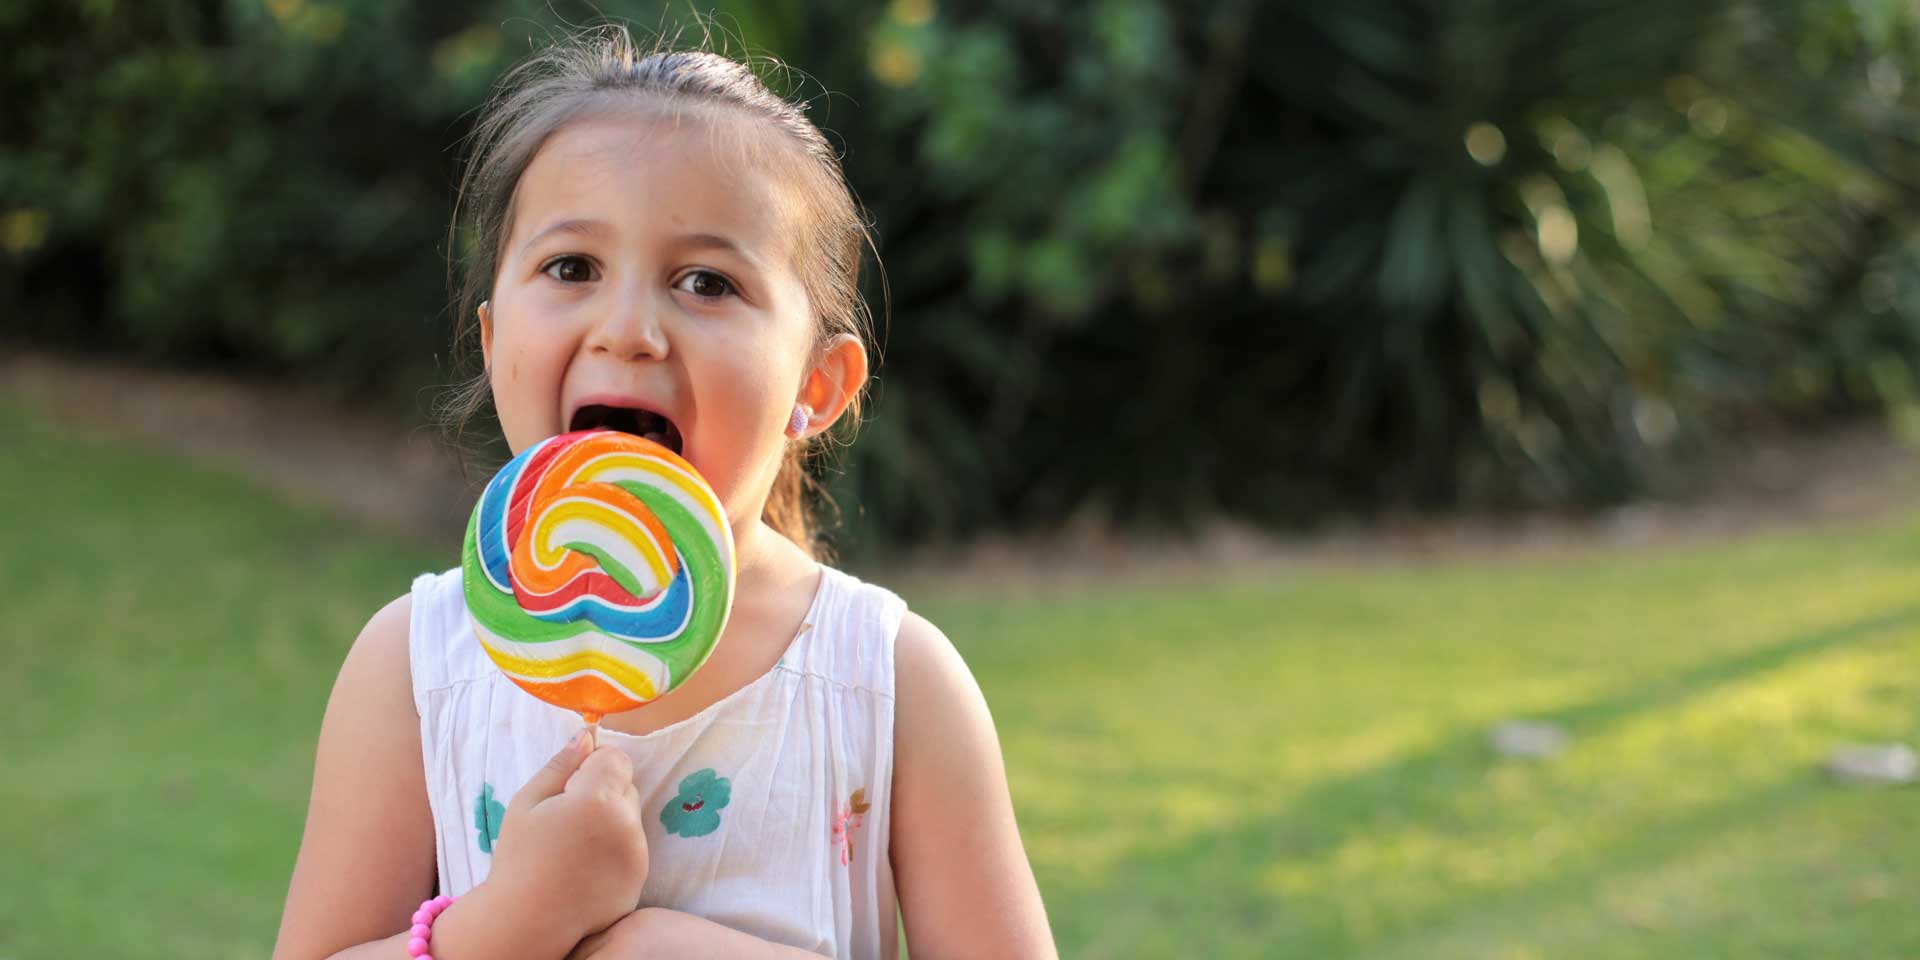 Girl licking a giant lollypop - all that sugar could lead to cavities.